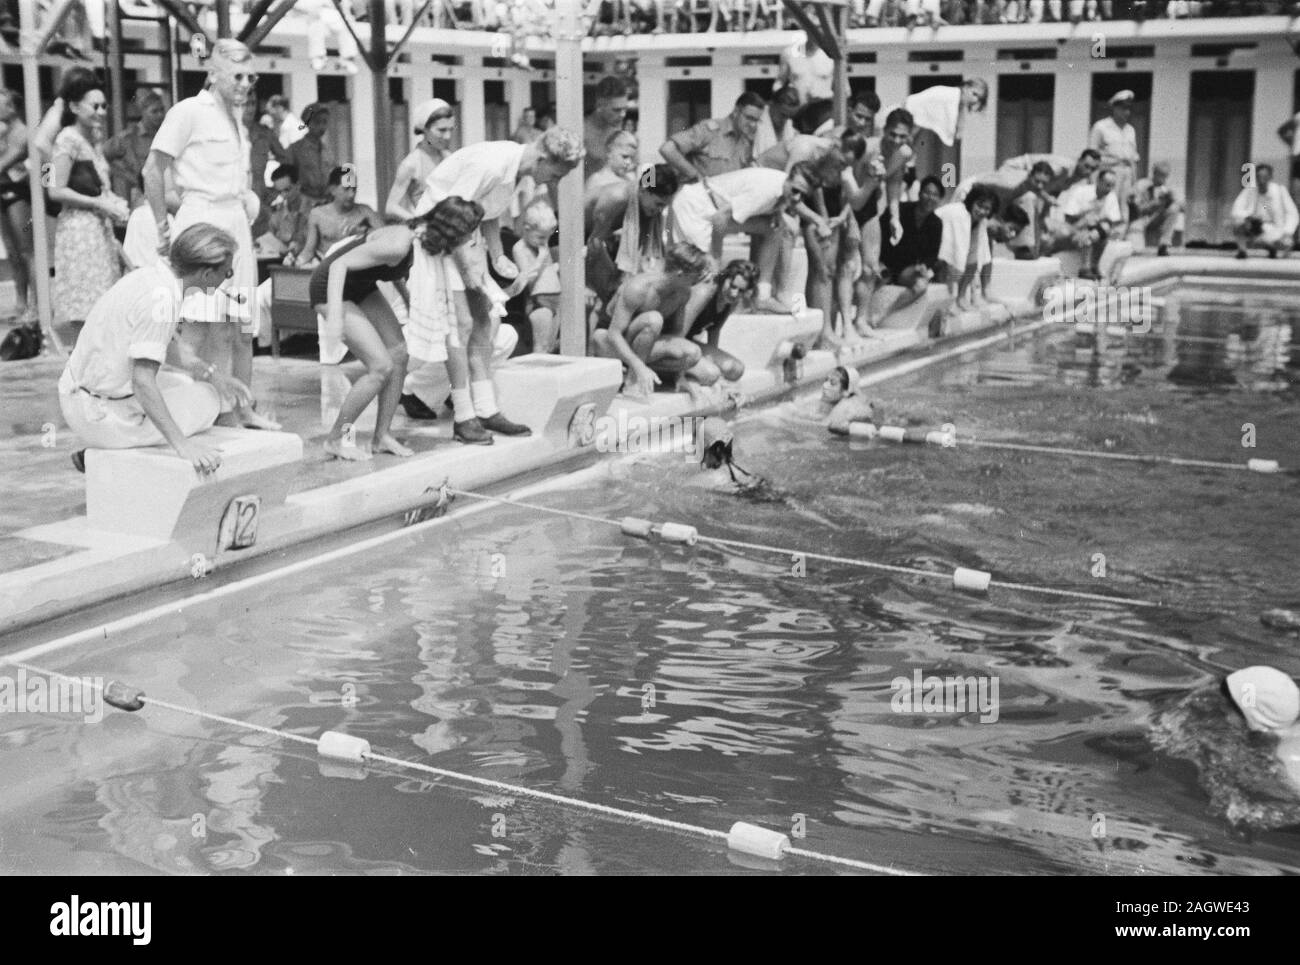 1940 Young Boys Diving & Swimming in Pool PHOTO 175-p 